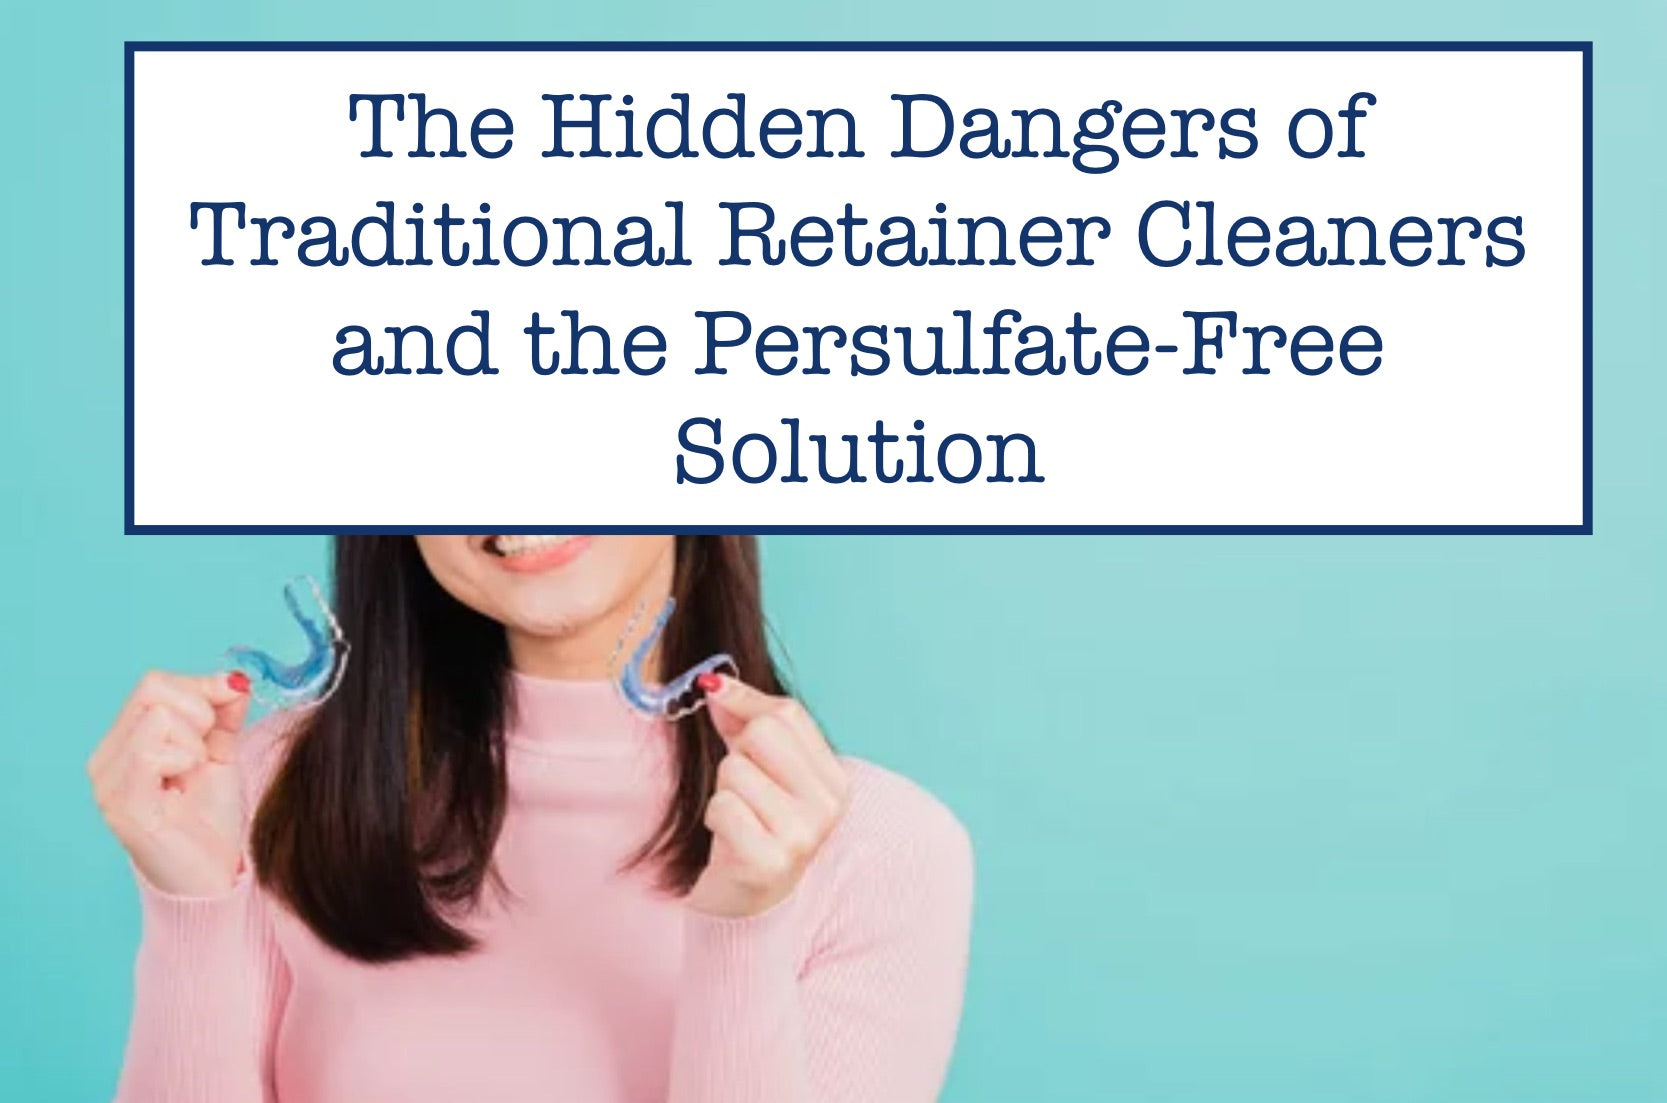 The Hidden Dangers of Traditional Retainer Cleaners and the Persulfate-Free Solution